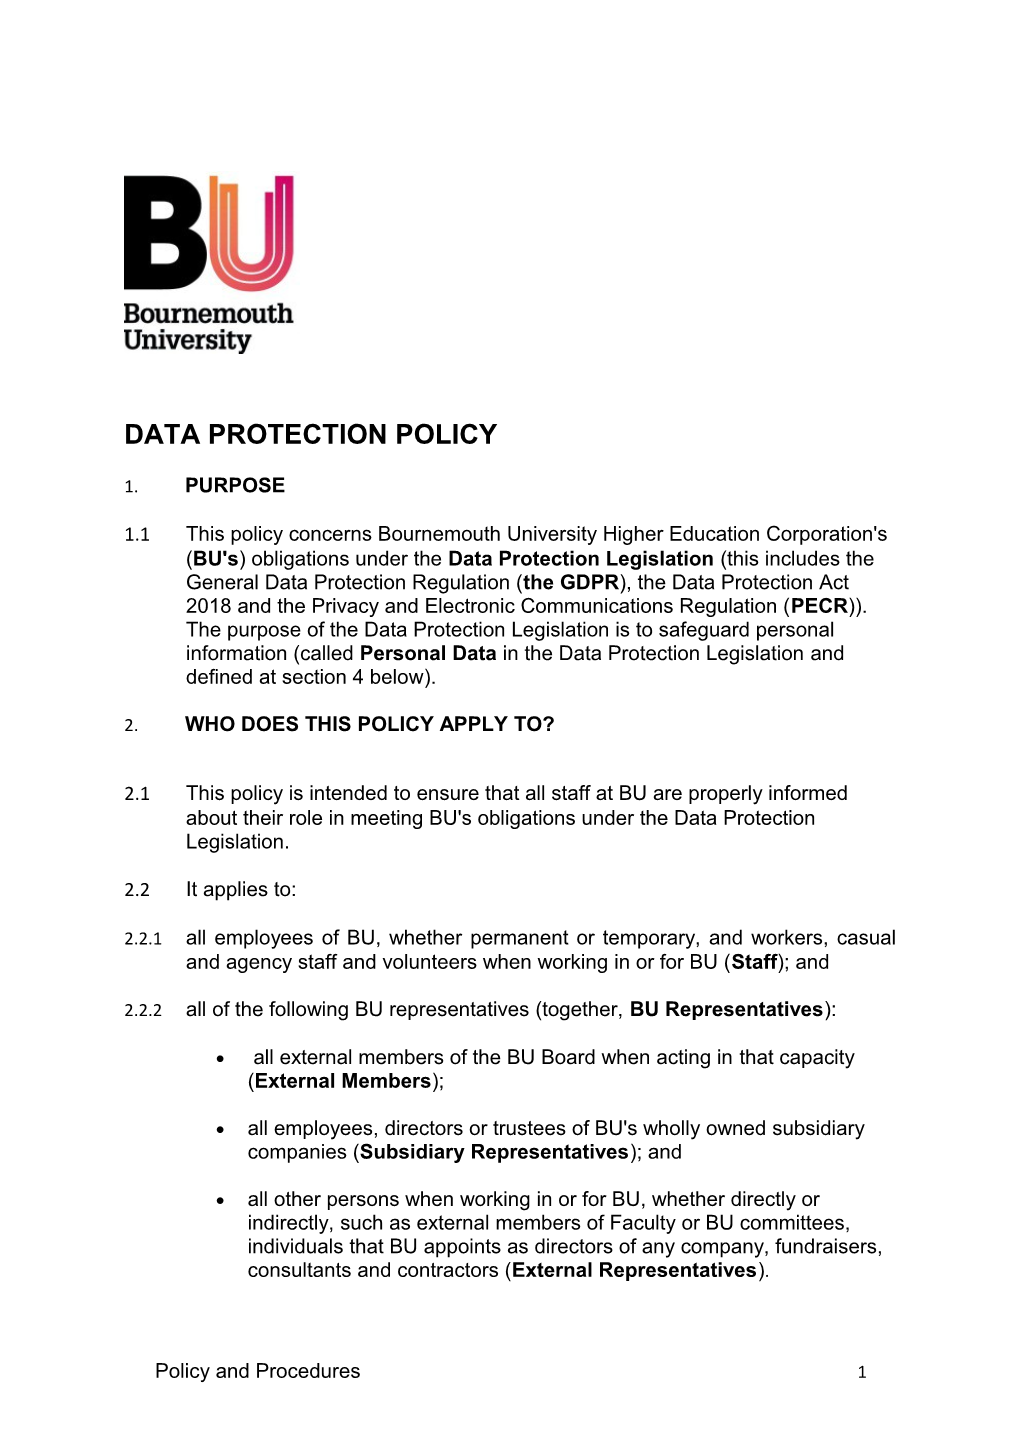 Data Protection Policy for Staff and BU Representatives